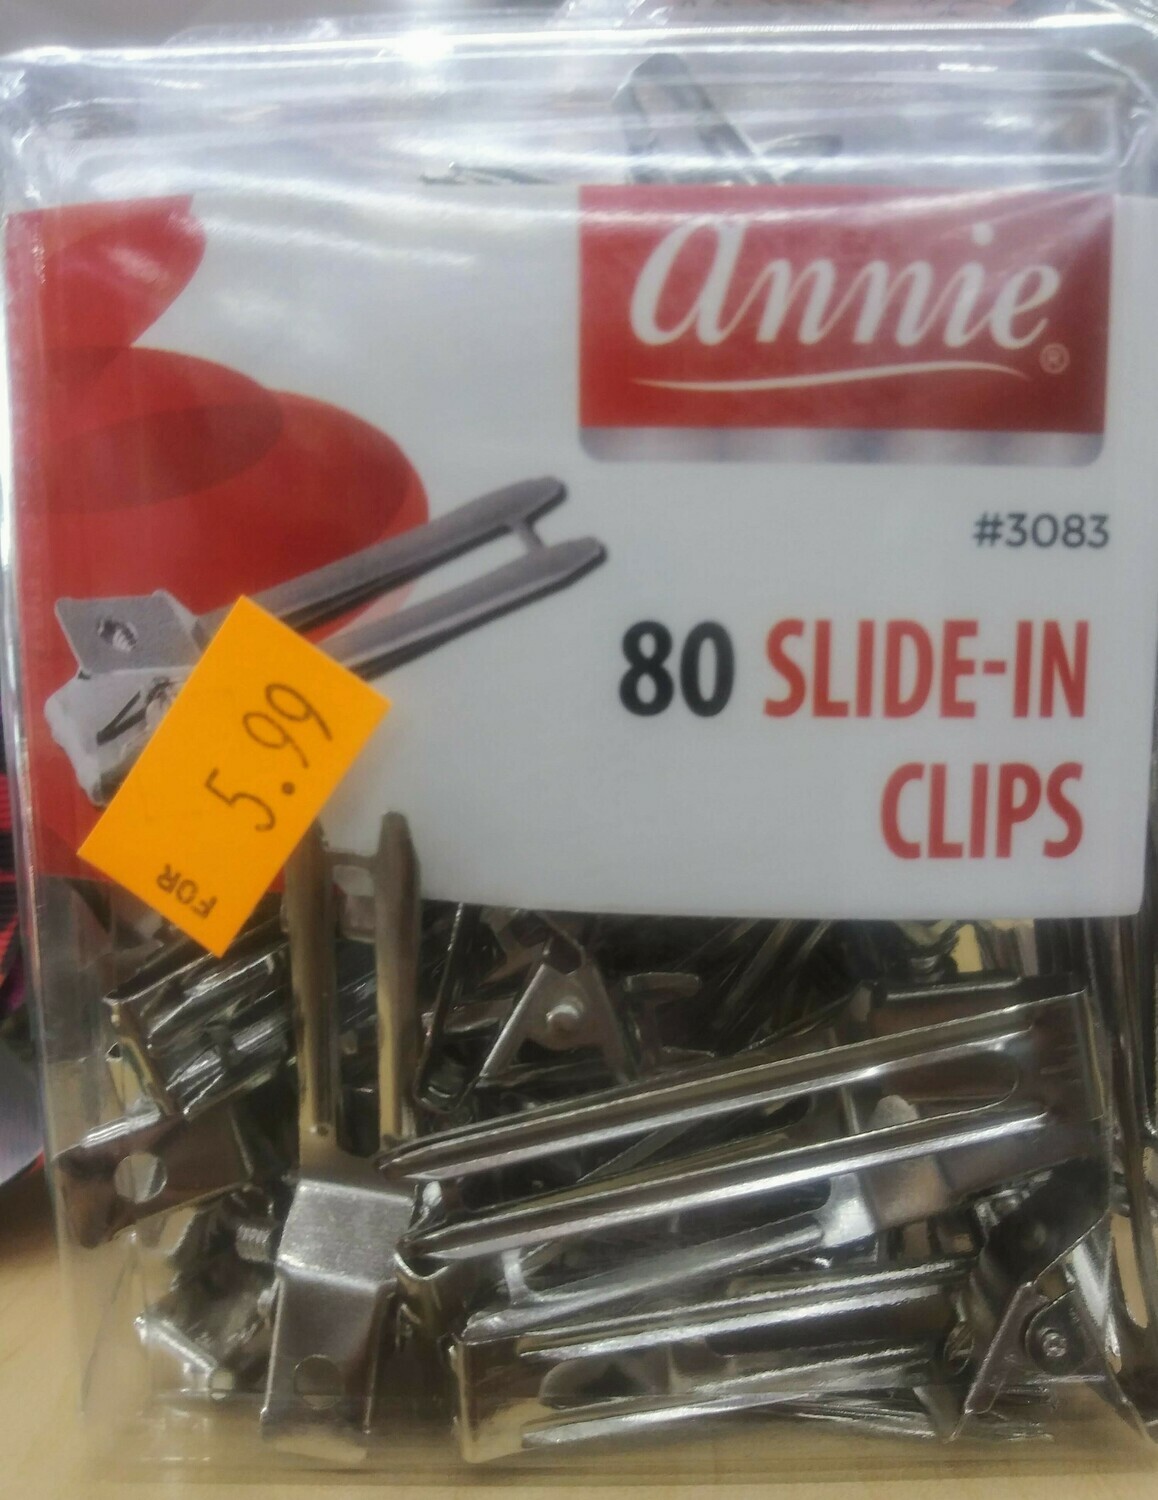 Annie Slide-In Clips (80)